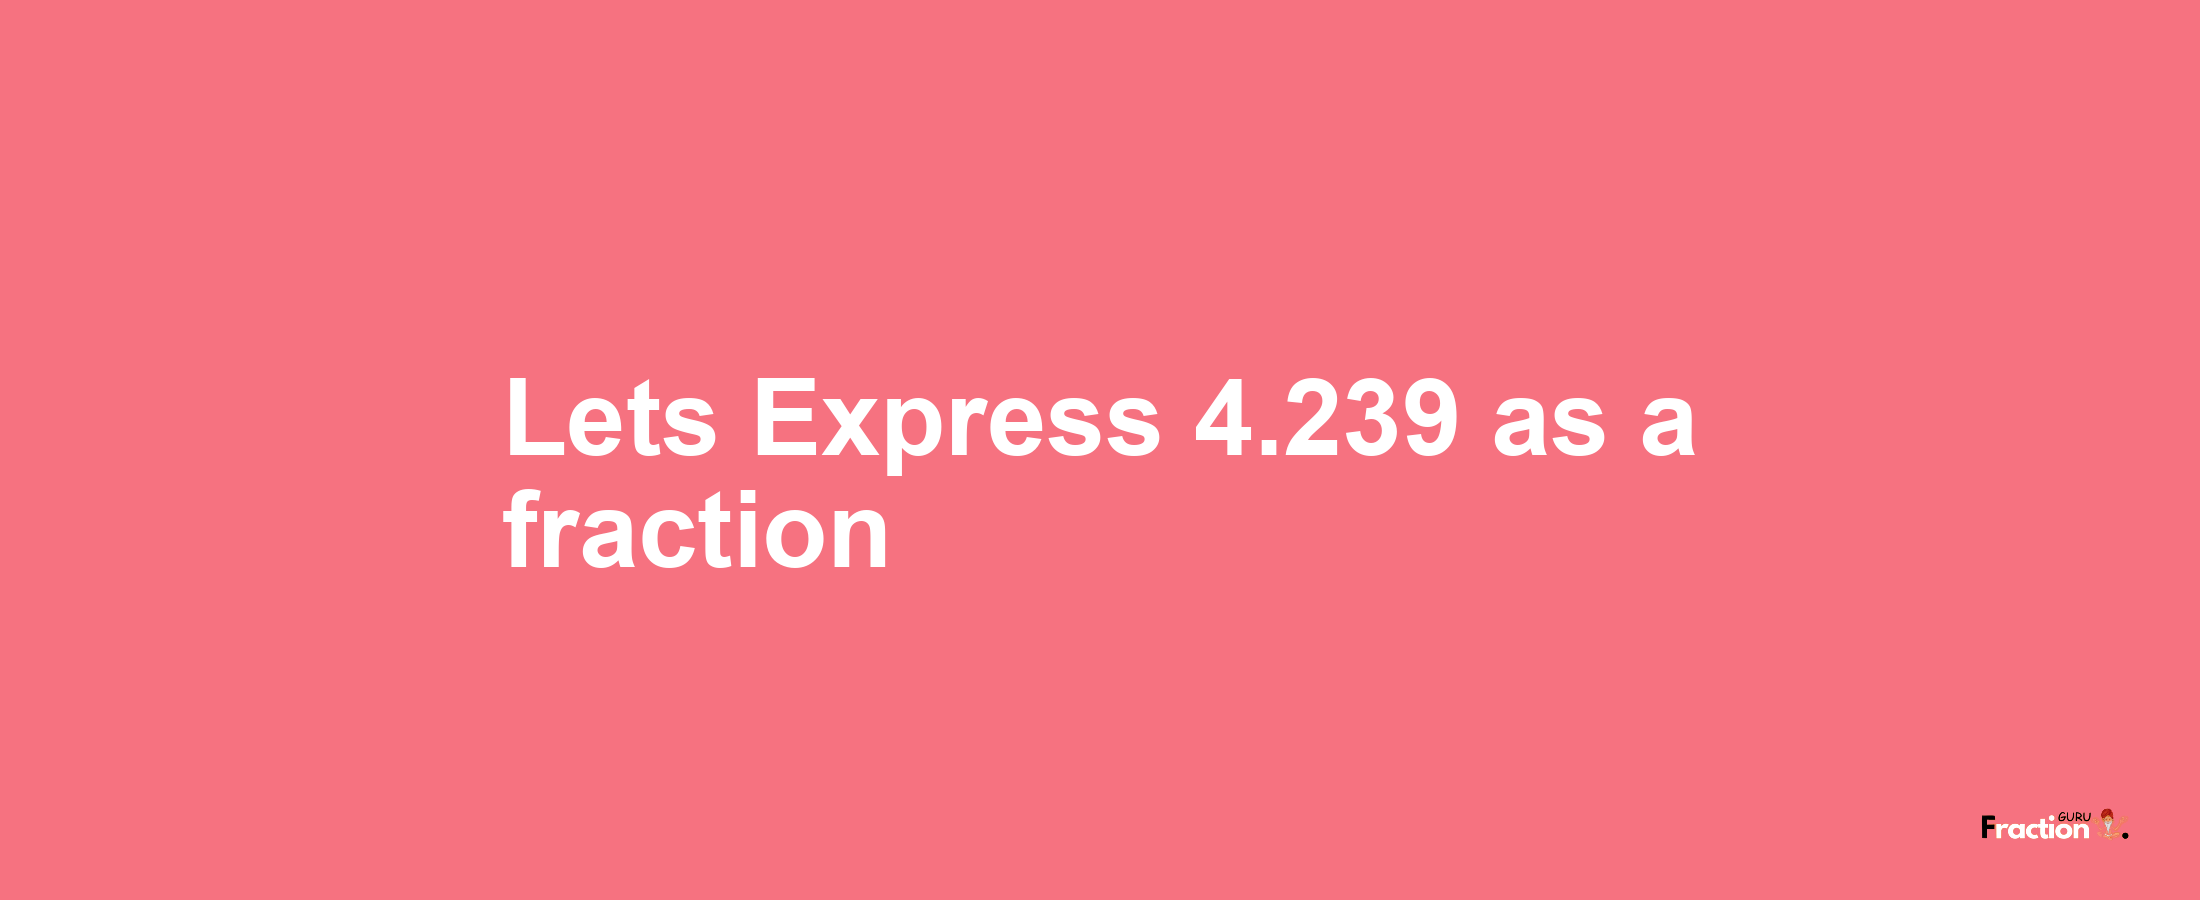 Lets Express 4.239 as afraction